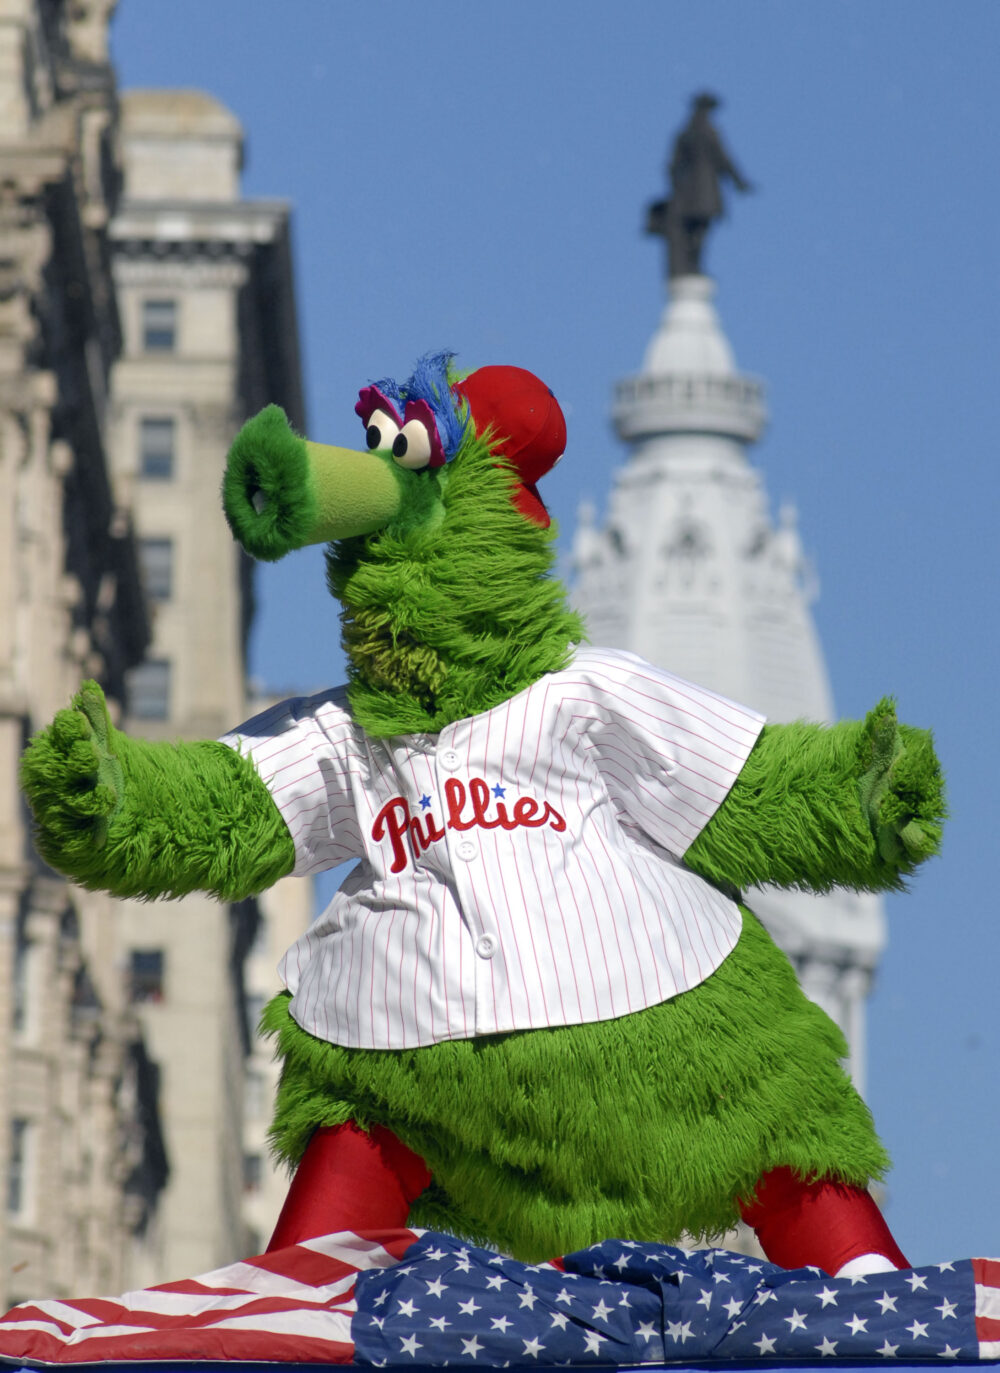 Phillies Phanatic at the World Series Championship Parade in 2008. 